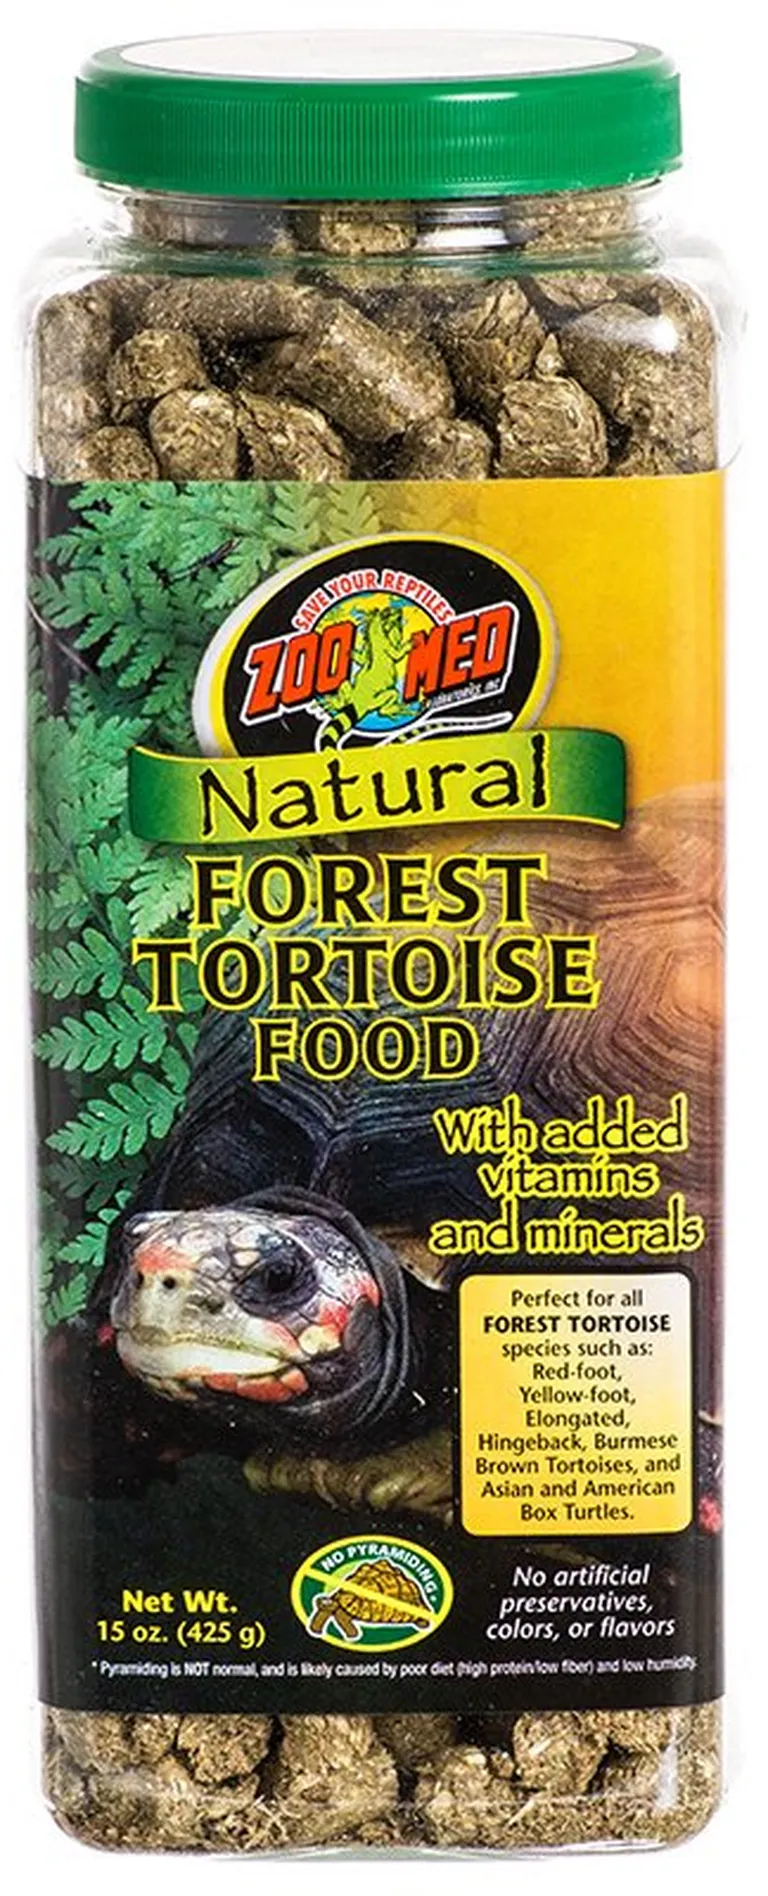 Zoo Med Natural Forest Tortoise Food Photo 2